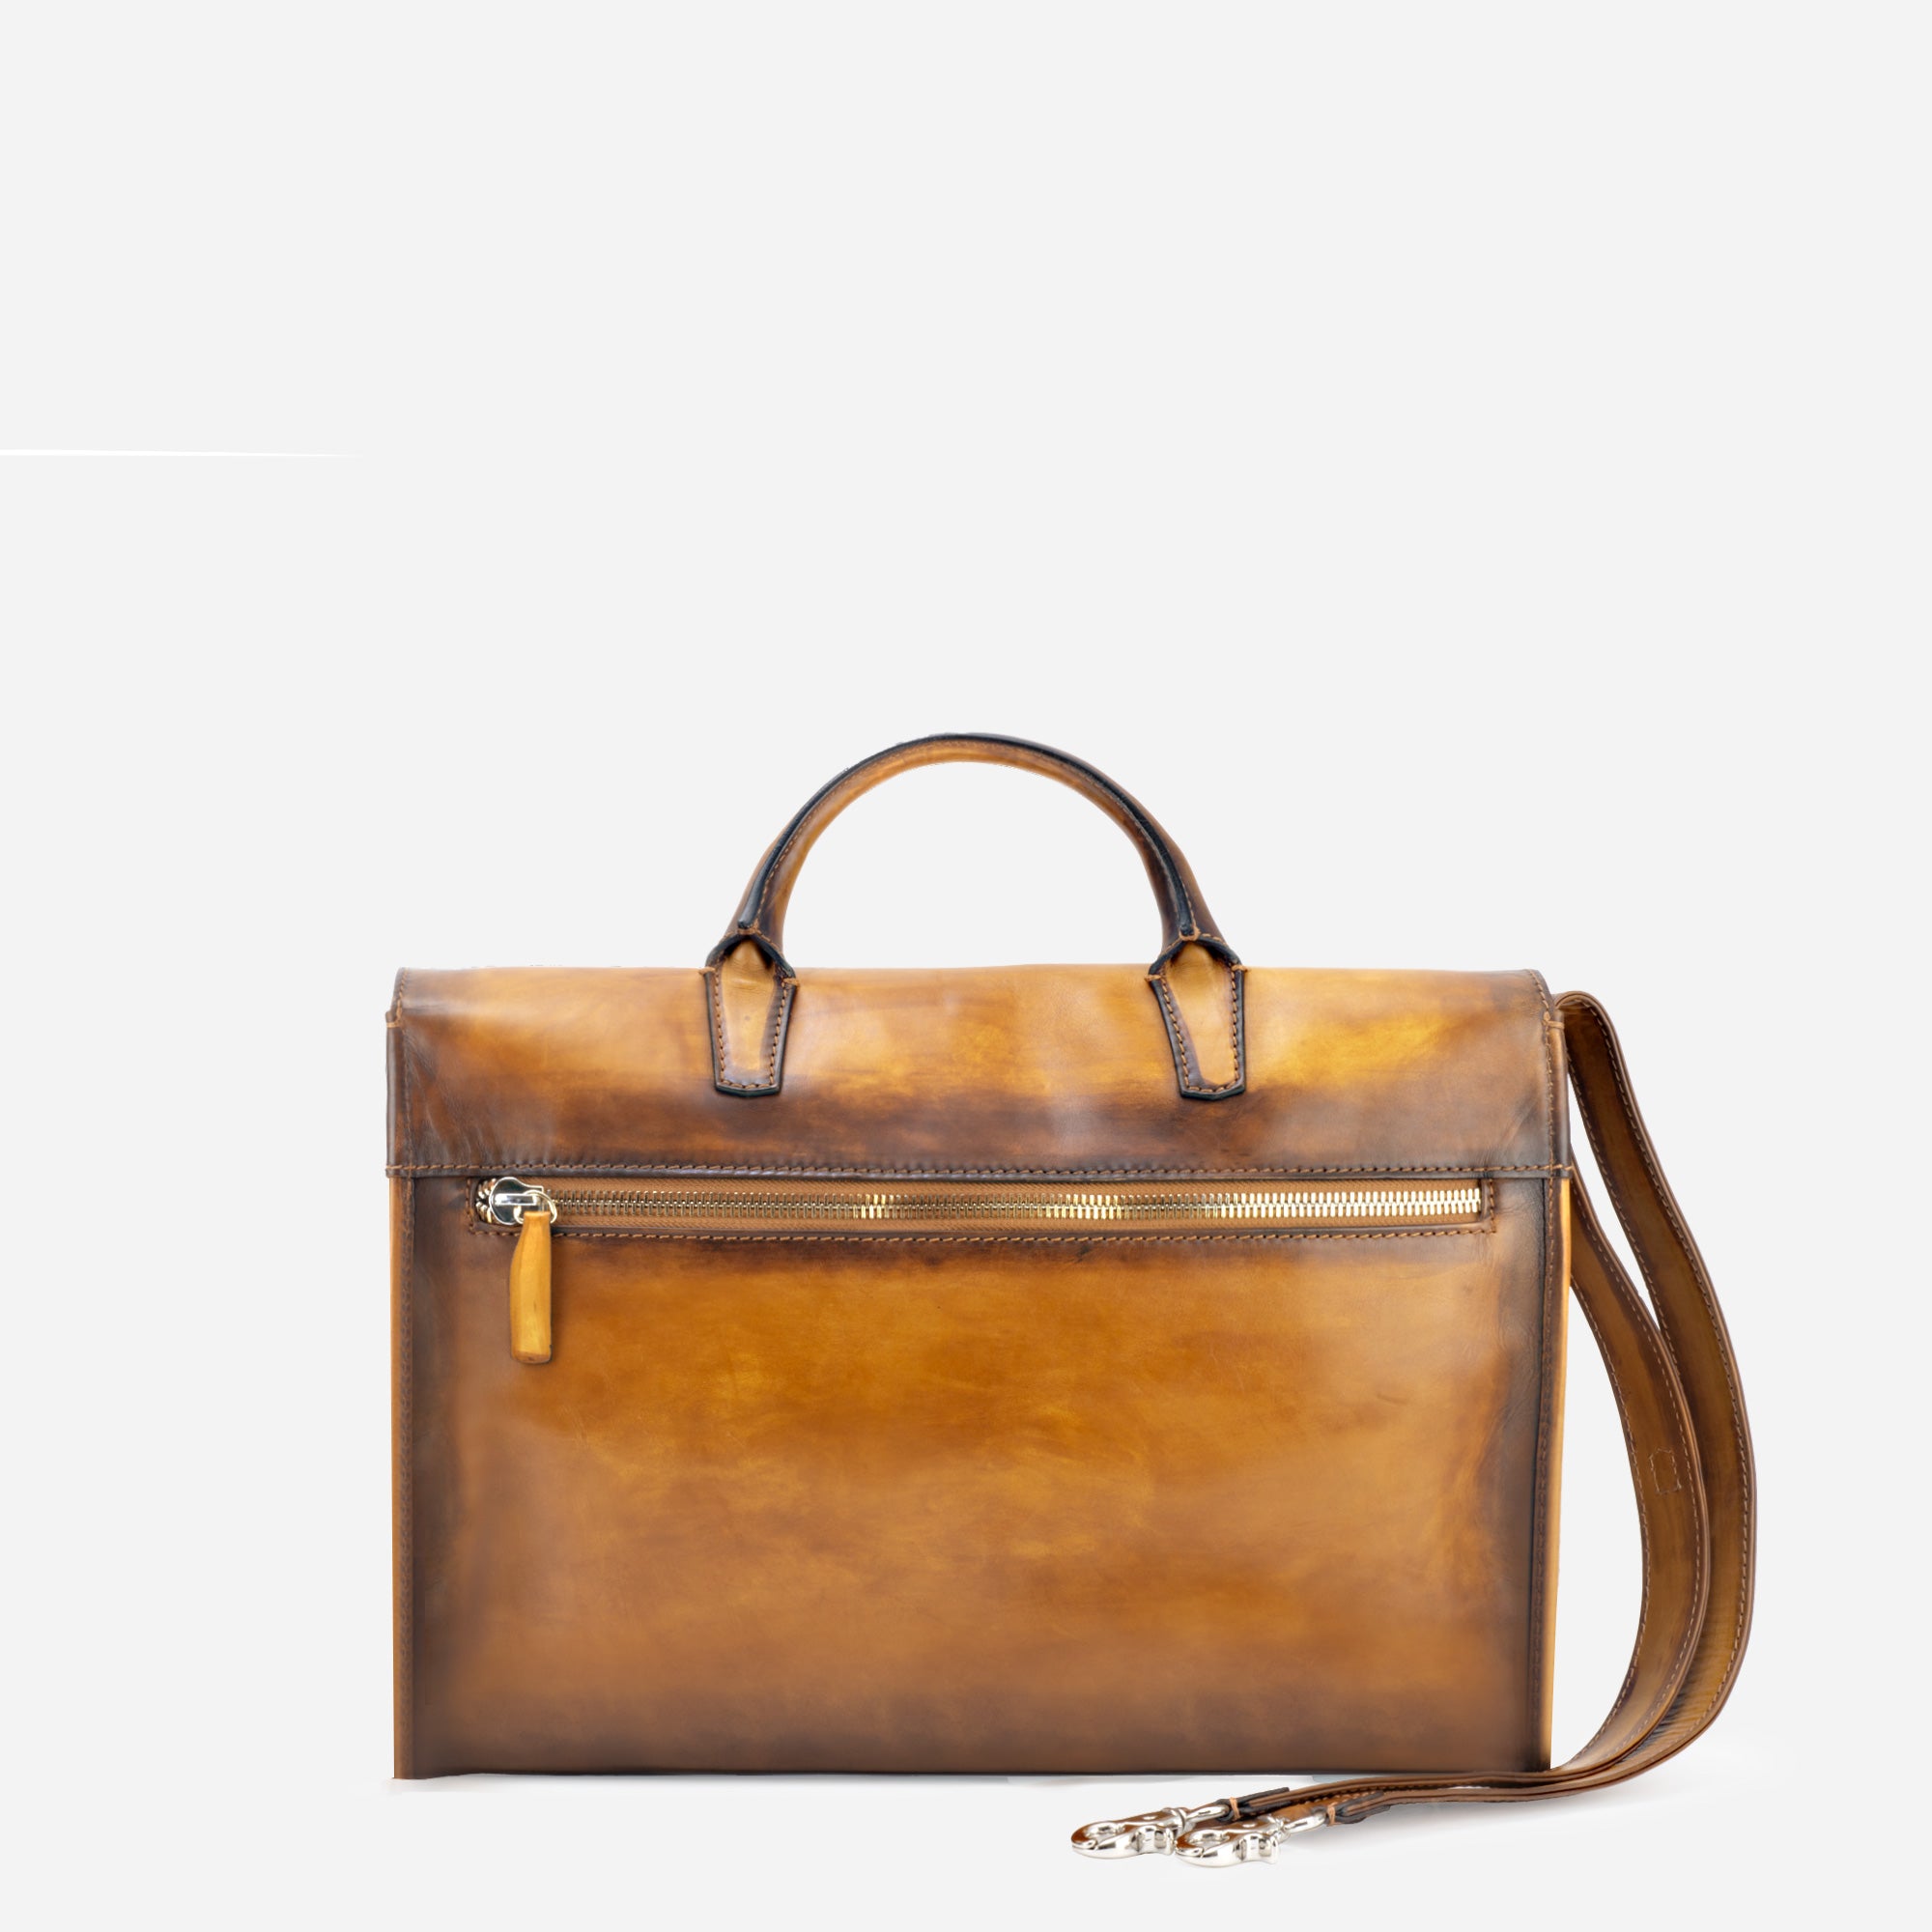 173M - Briefcase <br> Hand painted calfskin leather